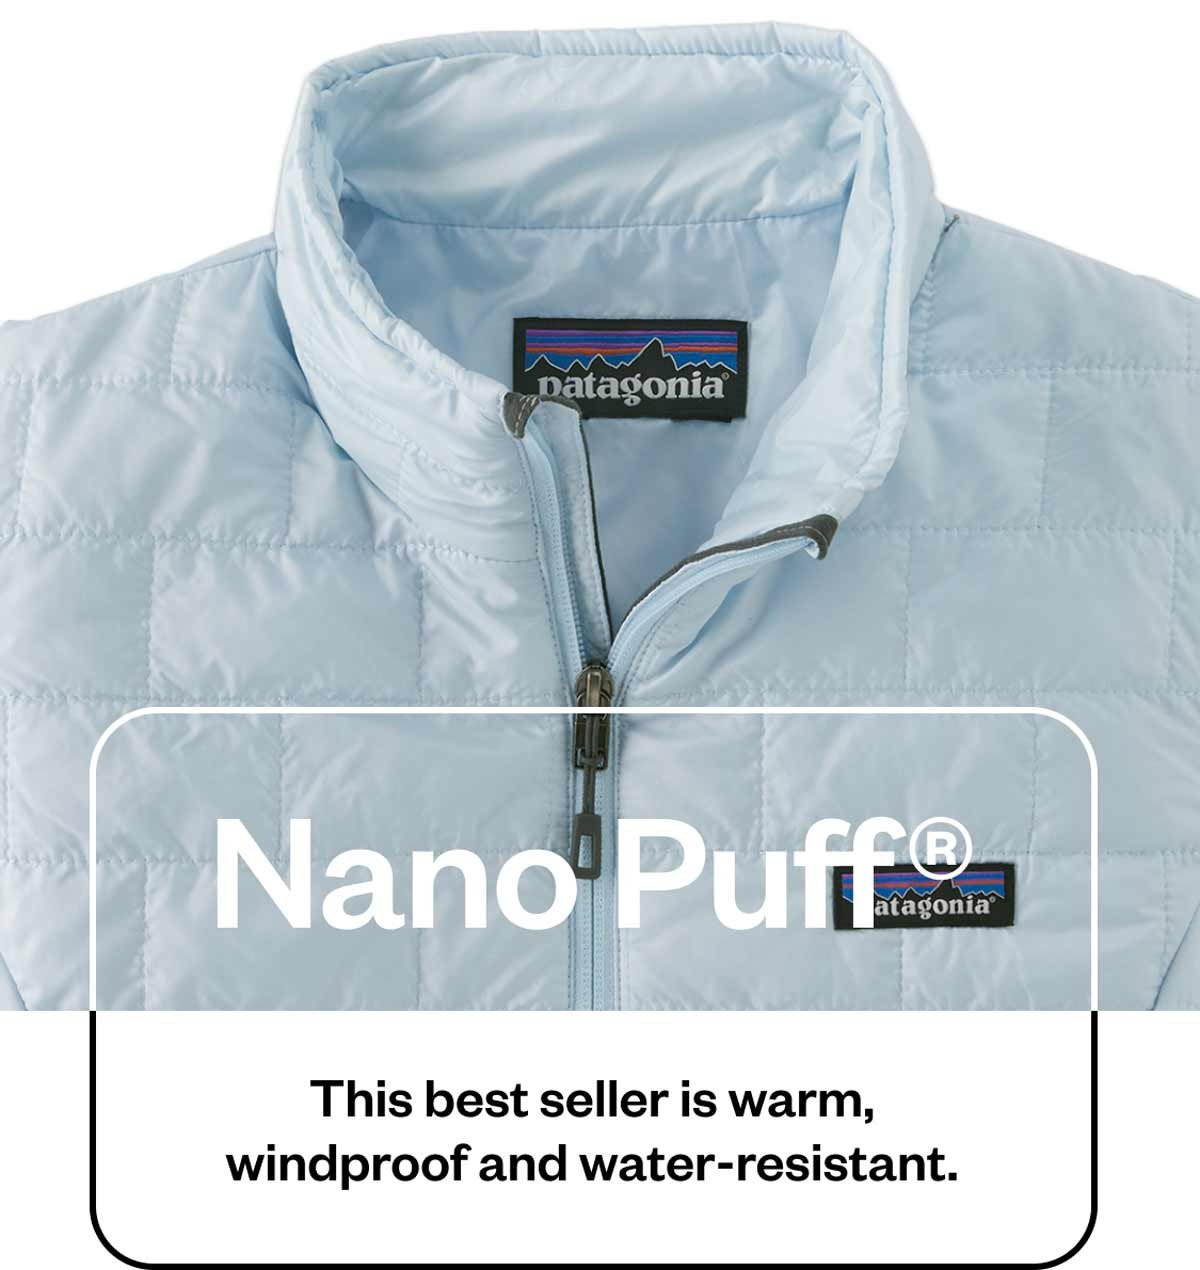 Nano-Puff: This best seller is warm, windproof and water-resistant.